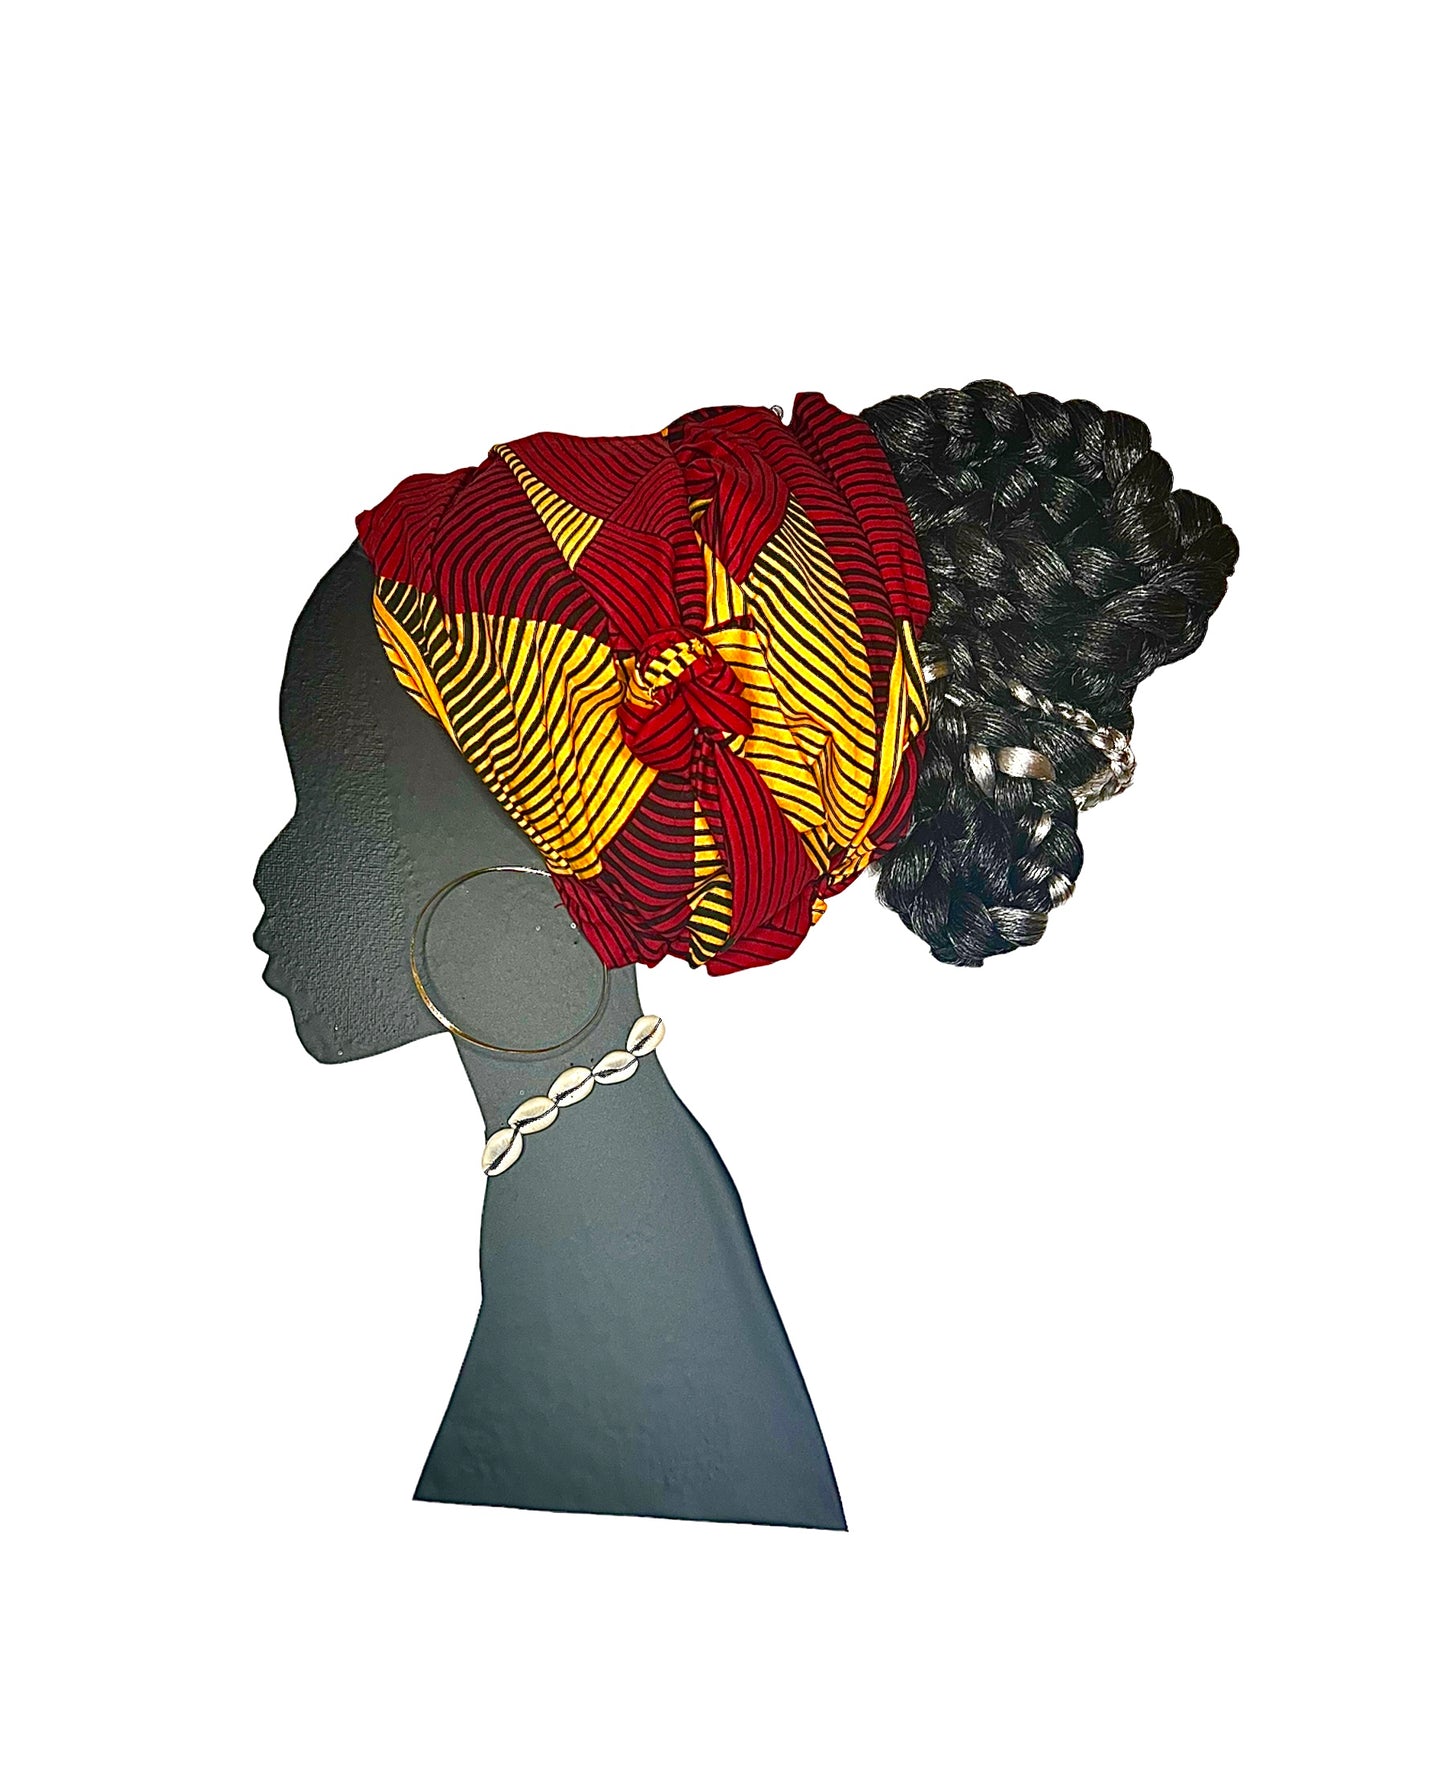 Canvas 3D Wall Art Painting African Woman Headwrap Pictures Modern Gold Black Woman Gold Jewelry Posters Prints Artwork Home Decor for Living Room Bedroom Office Framed Ready to Hang - 16"x12"x3pcs